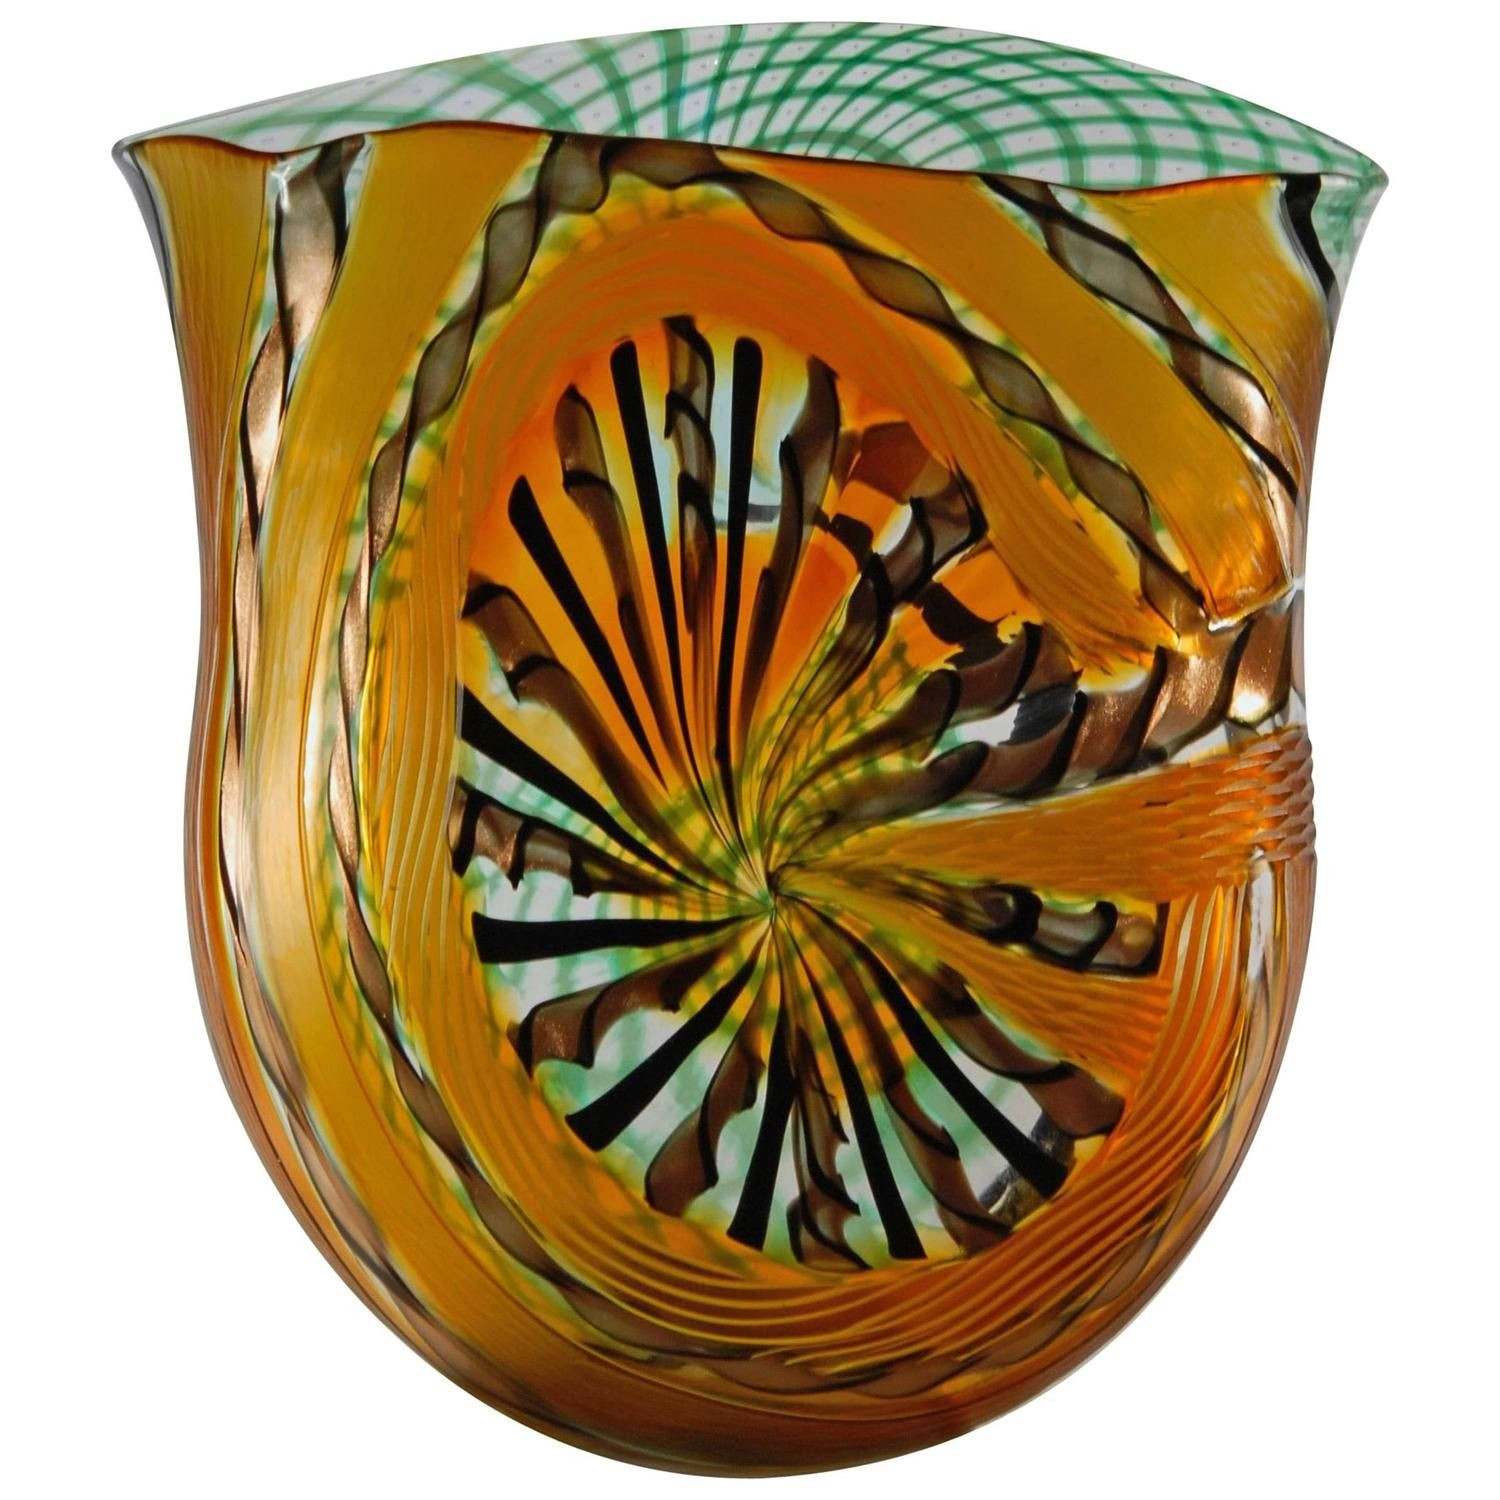 17 Great Murano Glass Vases for Sale 2023 free download murano glass vases for sale of afro celotto sunflower colors vessel sunflowers decorative regarding afro celotto sunflower colors vessel